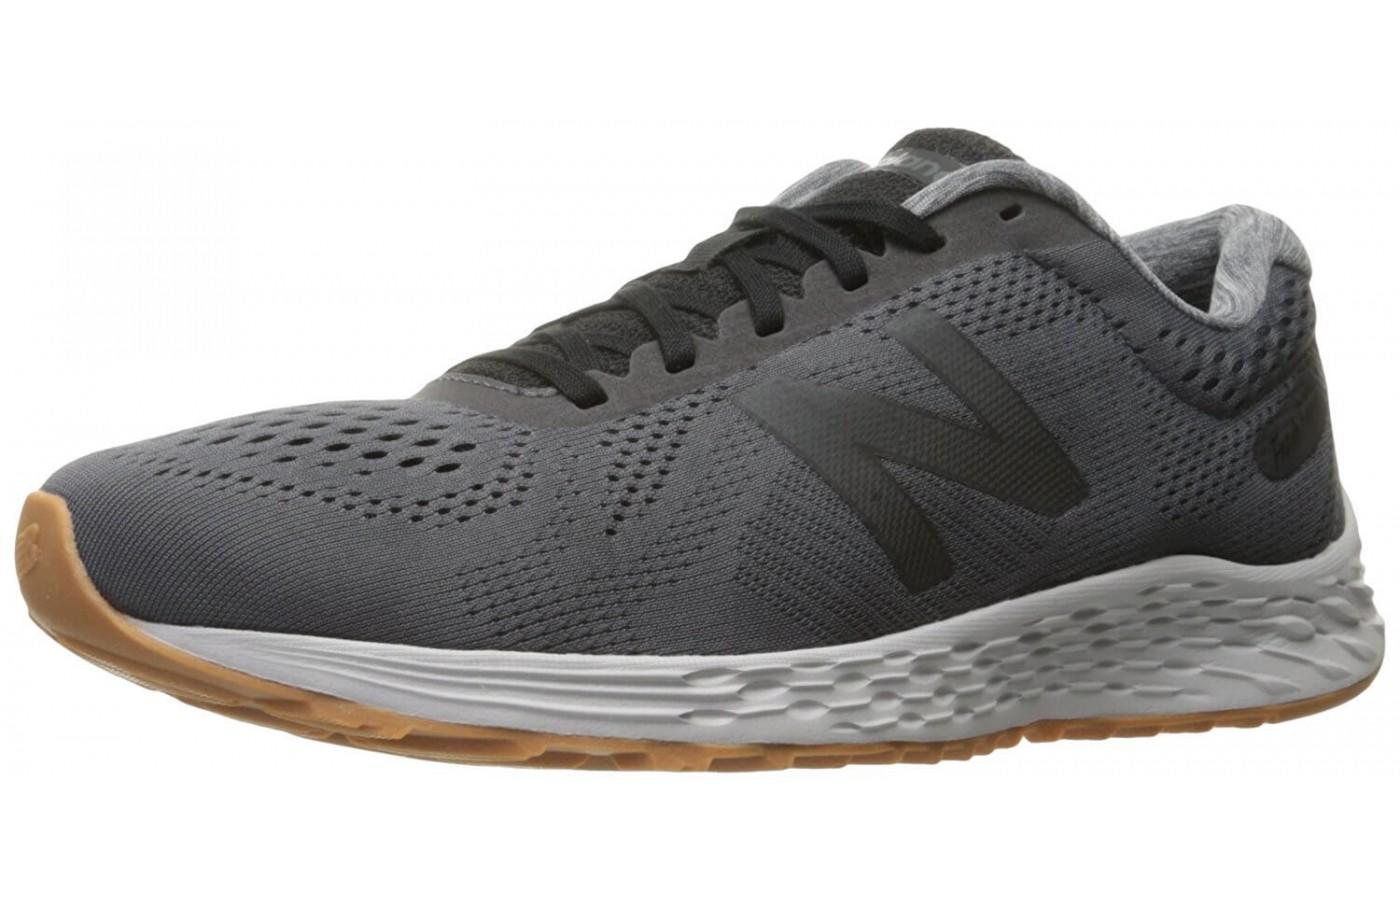 The New Balance Fresh Foam Arishi is a comfortable ride for everyday wear. 